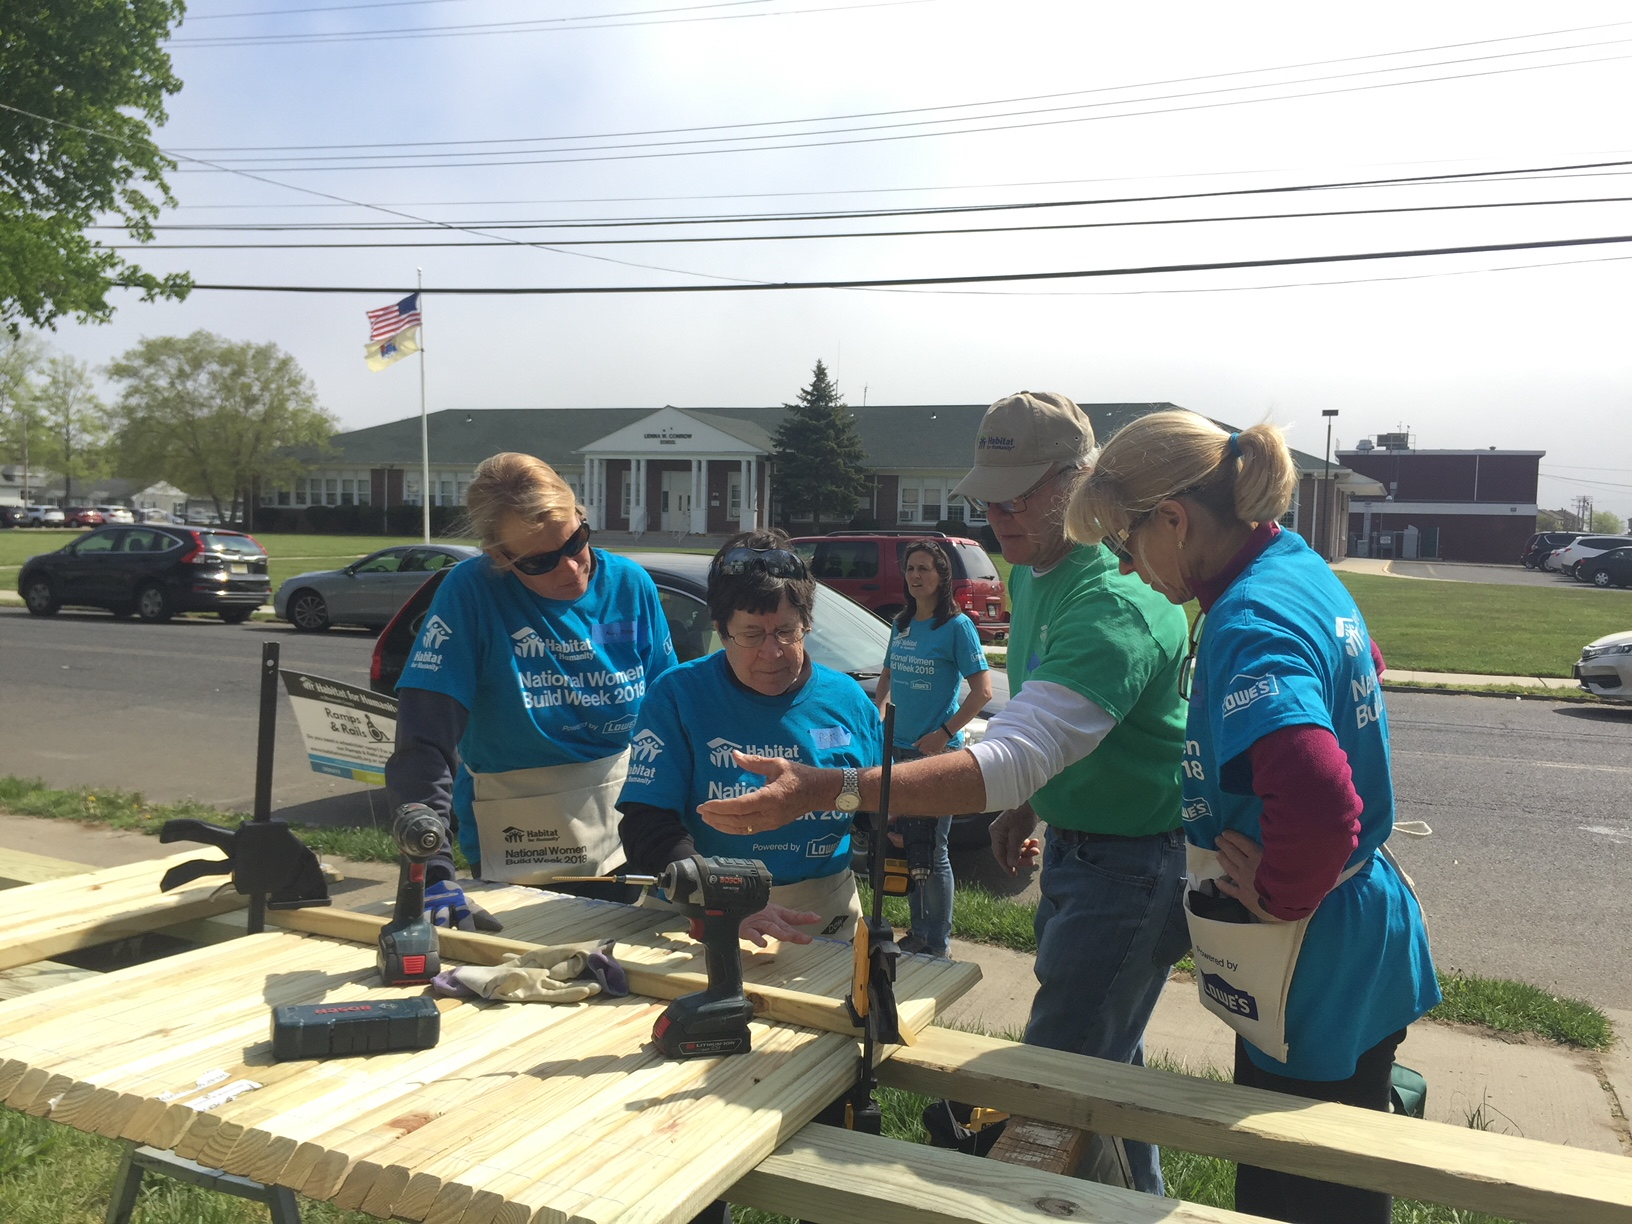 Support - Habitat for Humanity in Monmouth County